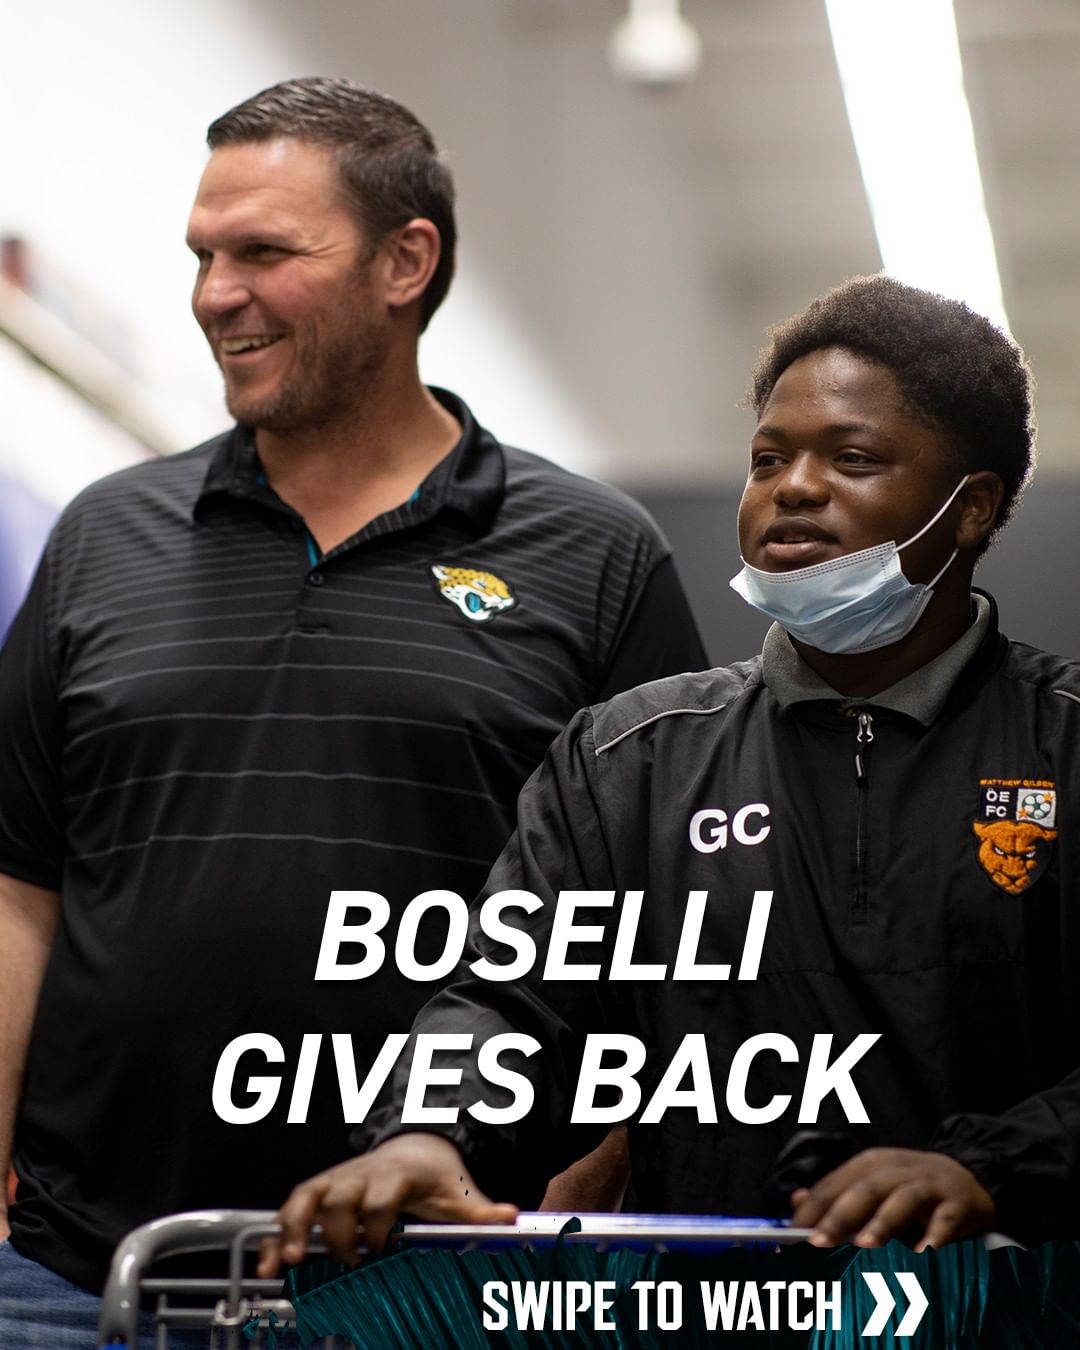 The Tony Boselli Foundation teamed up with @academy to surprise students from Ma...